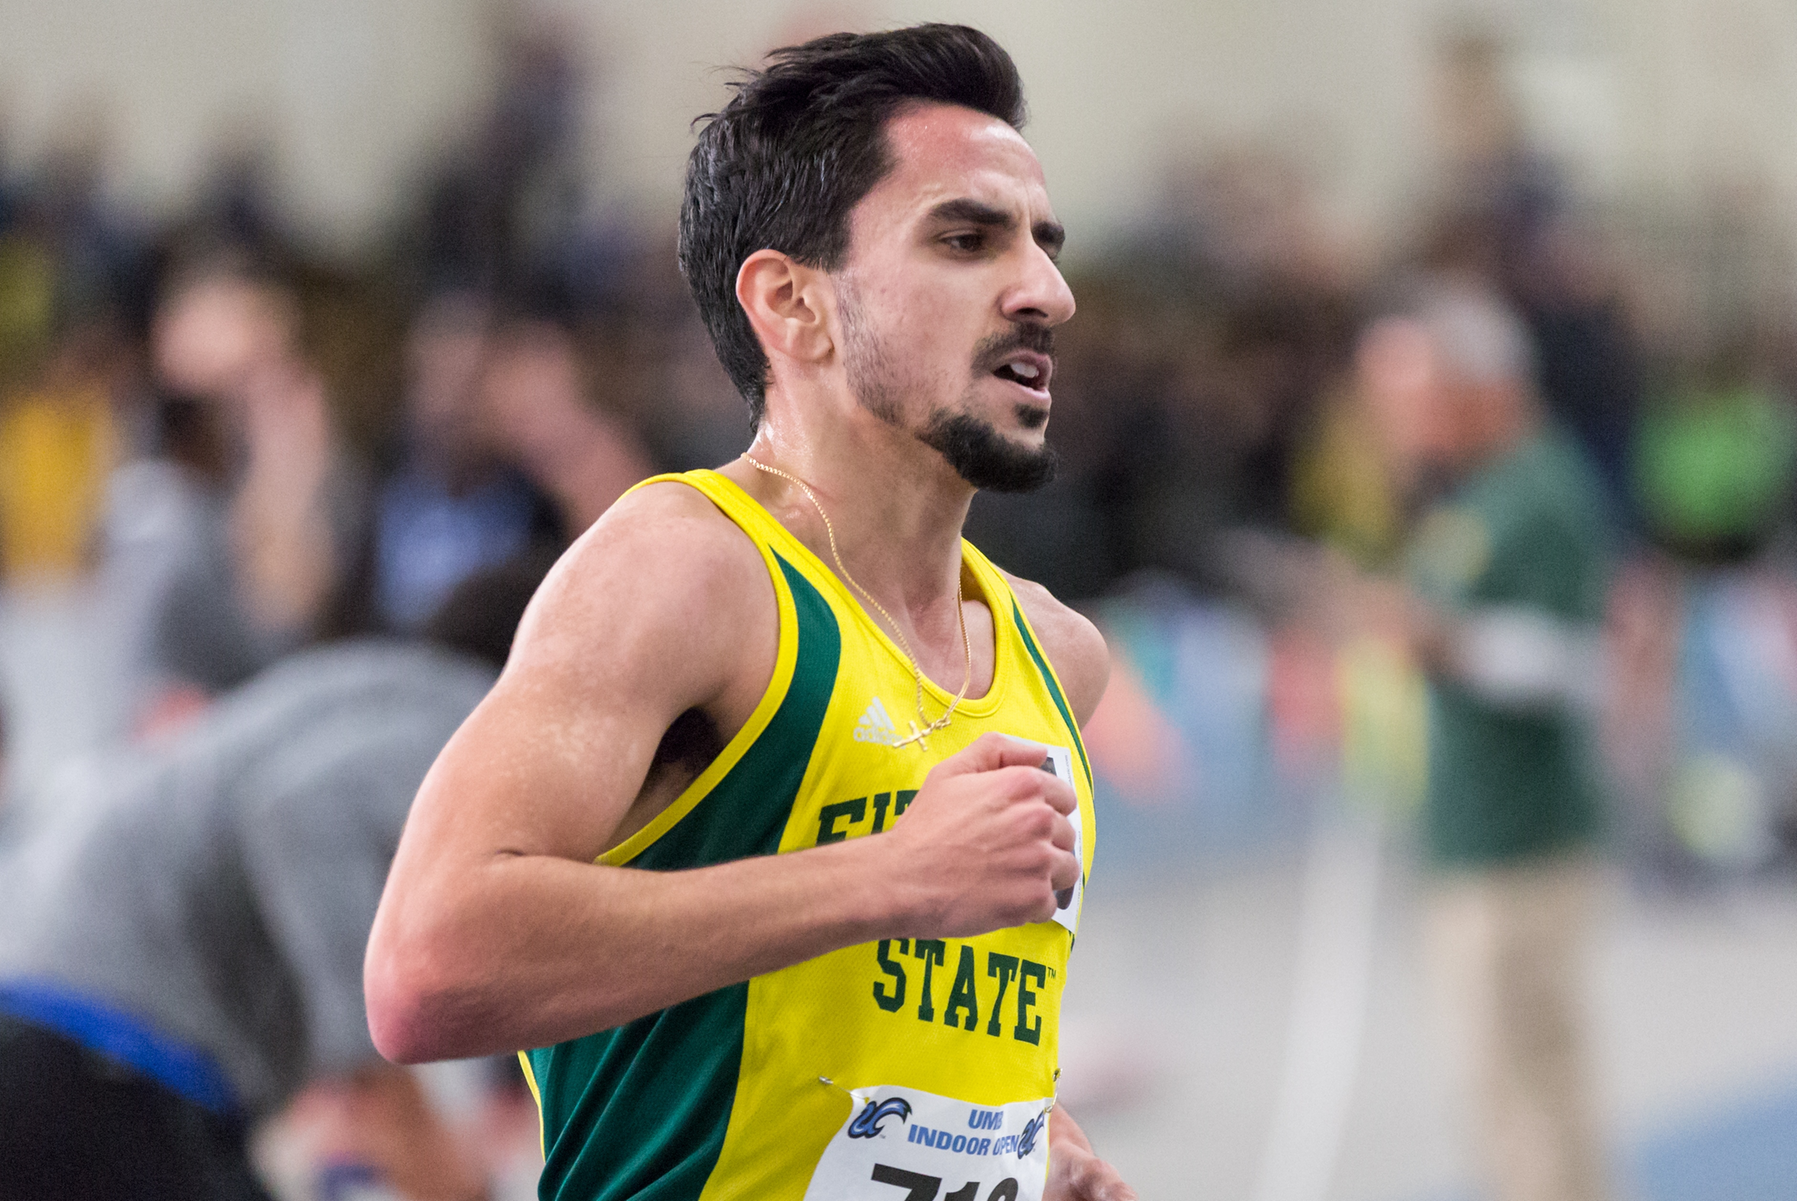 Fitchburg State Races At Tufts Final Qualifying Meet